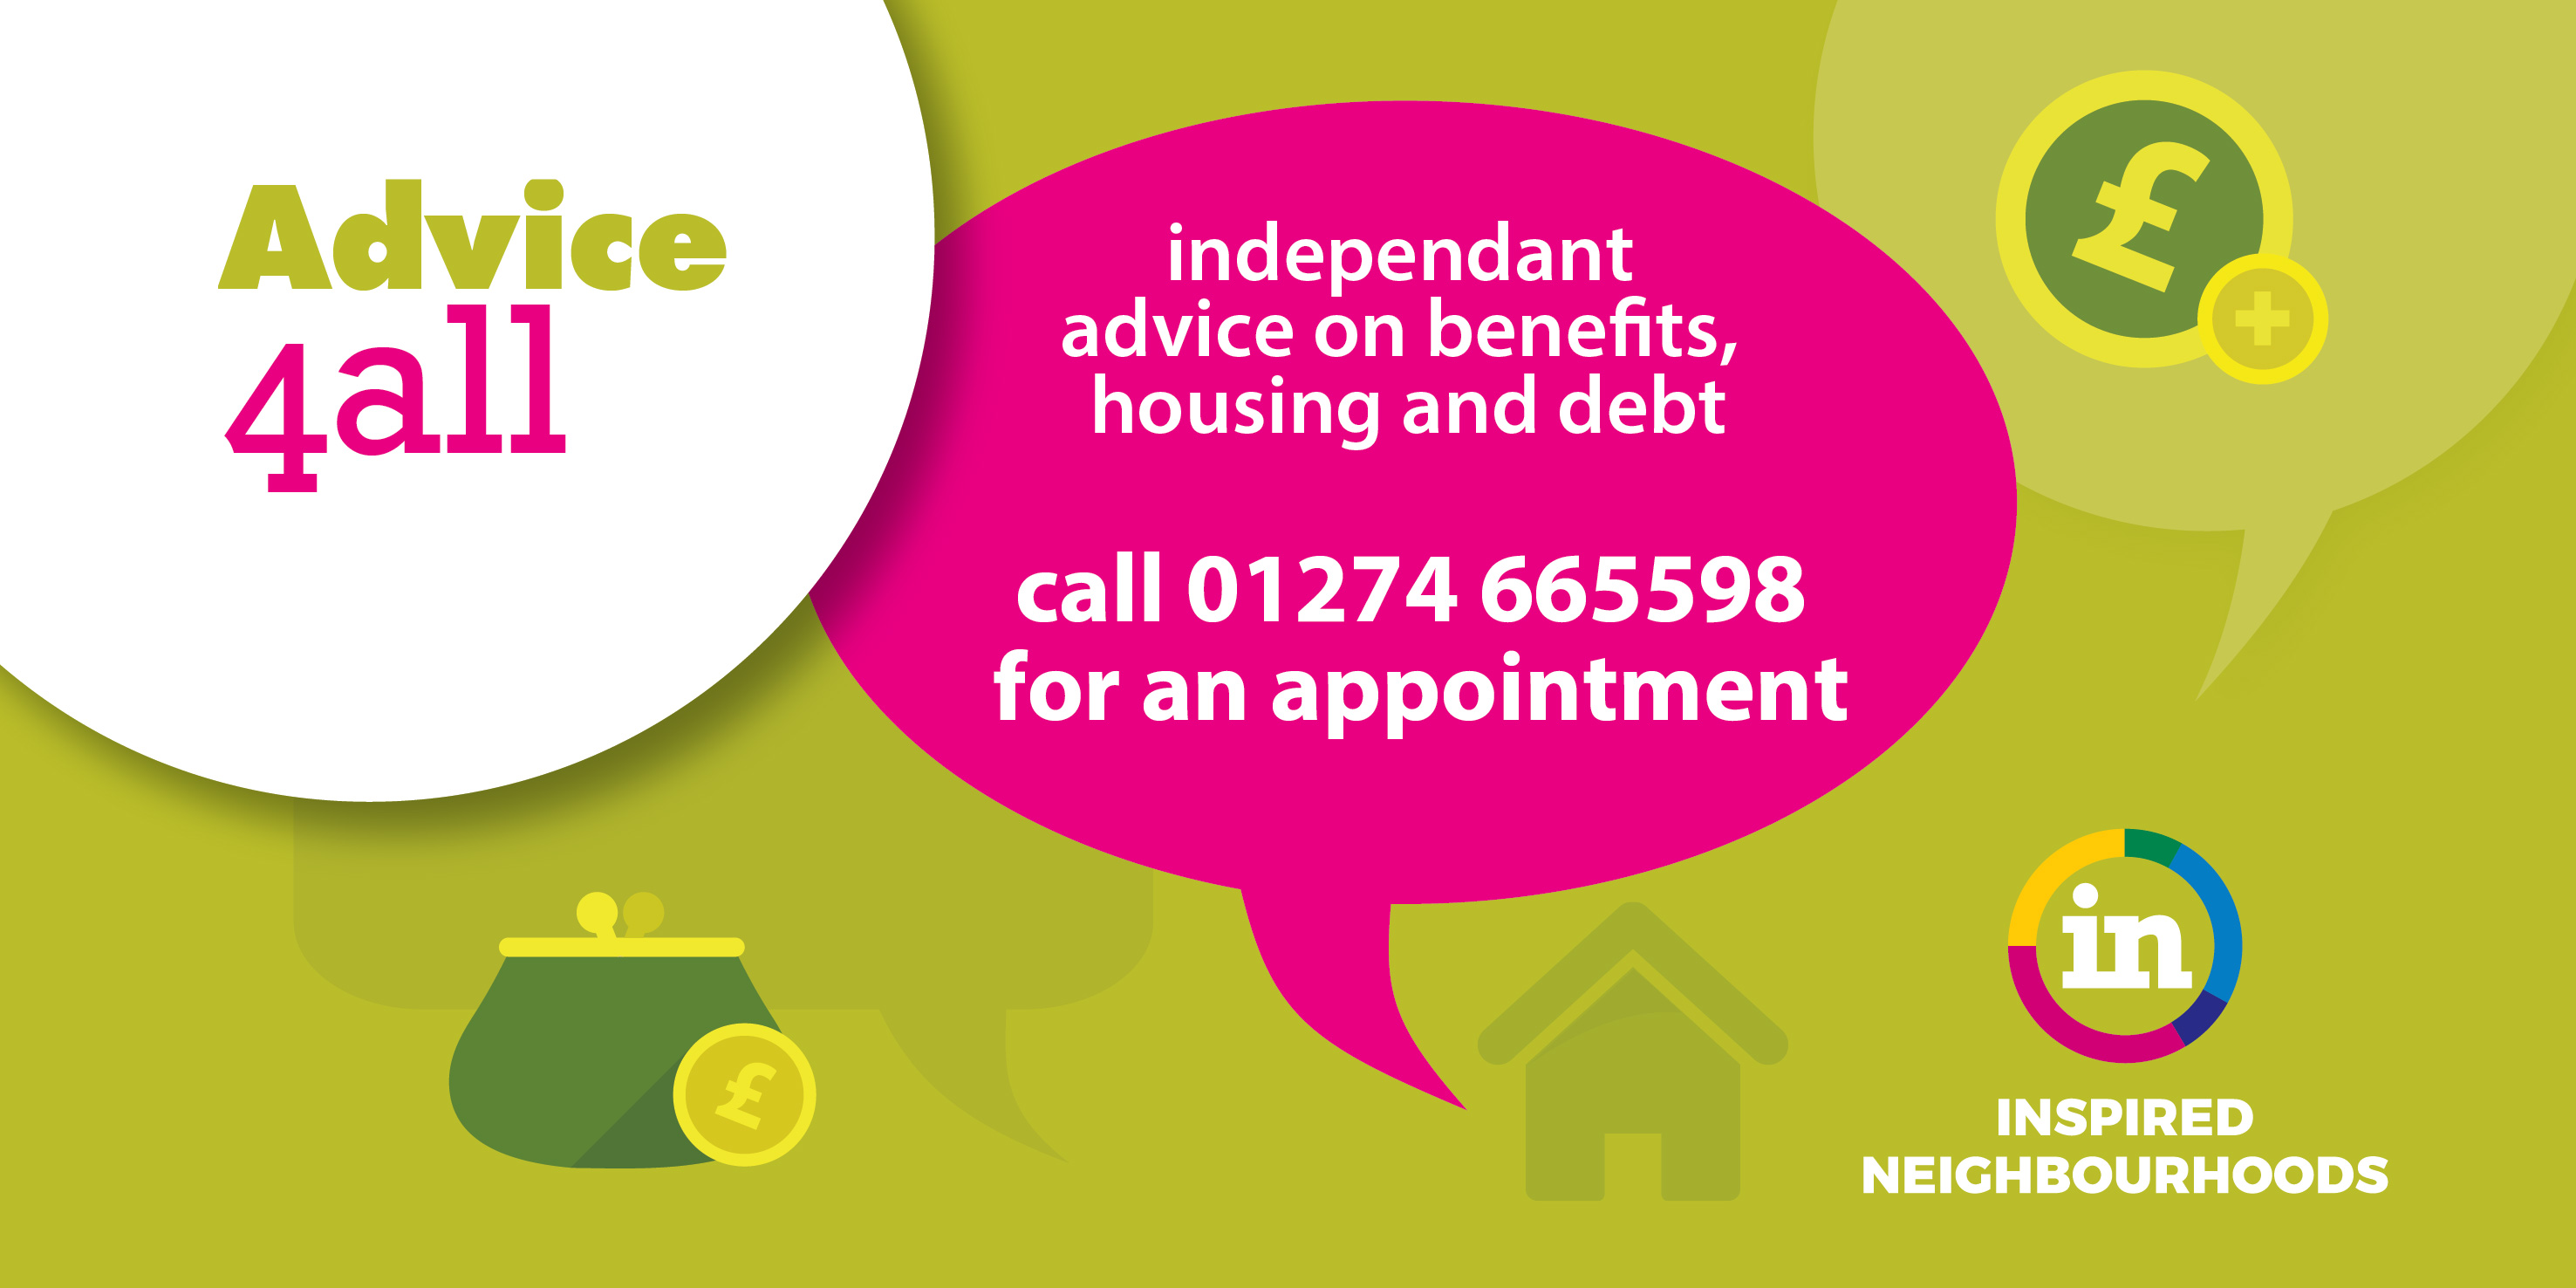 advice for all independent advice on benefits housing and debt call 01274 665598 for an appointment